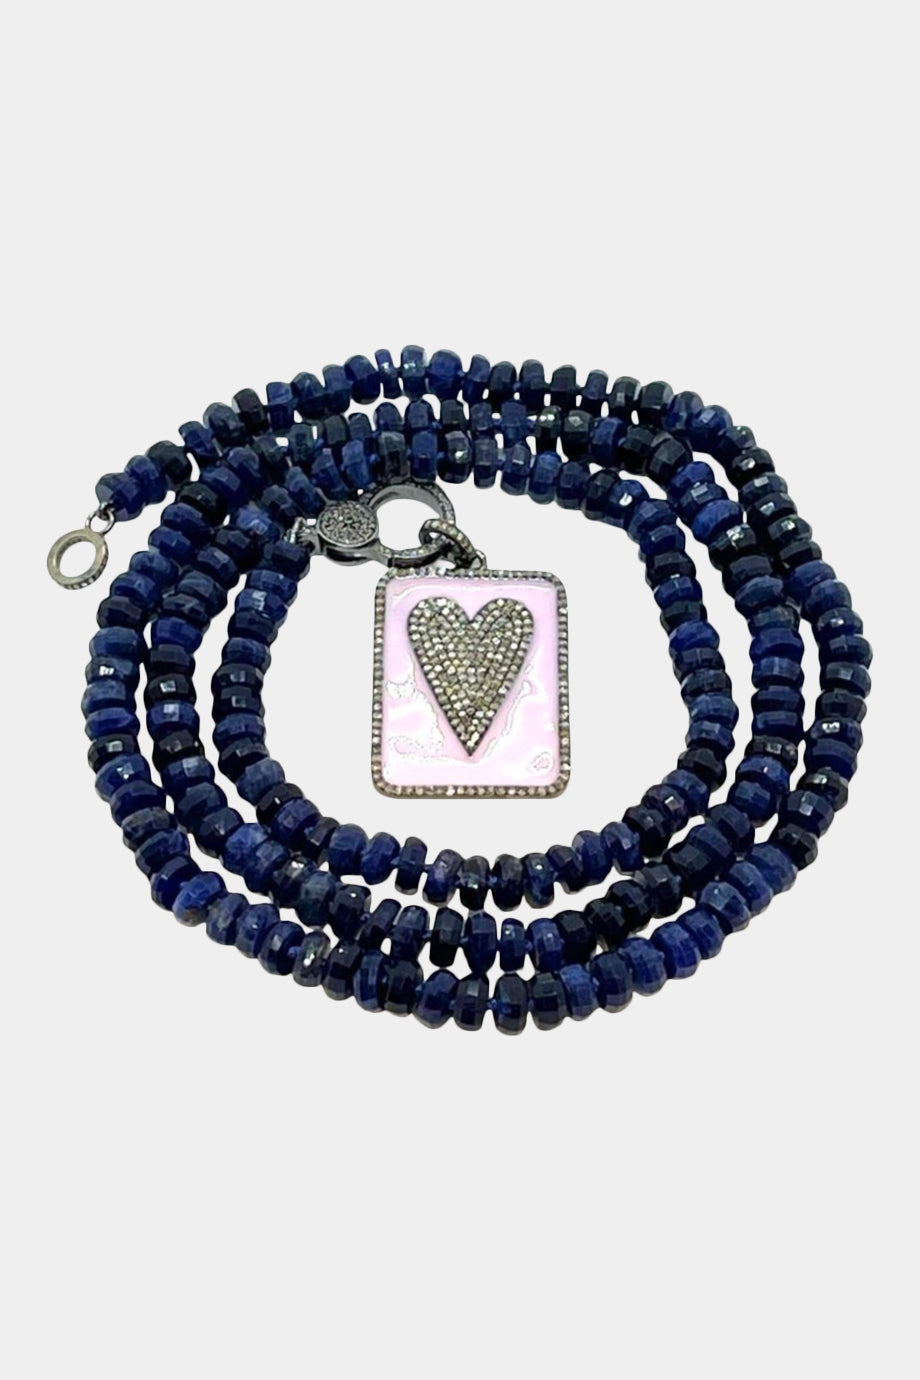 Sodalite Knotted Necklace with a Baby Pink Heart Pendant